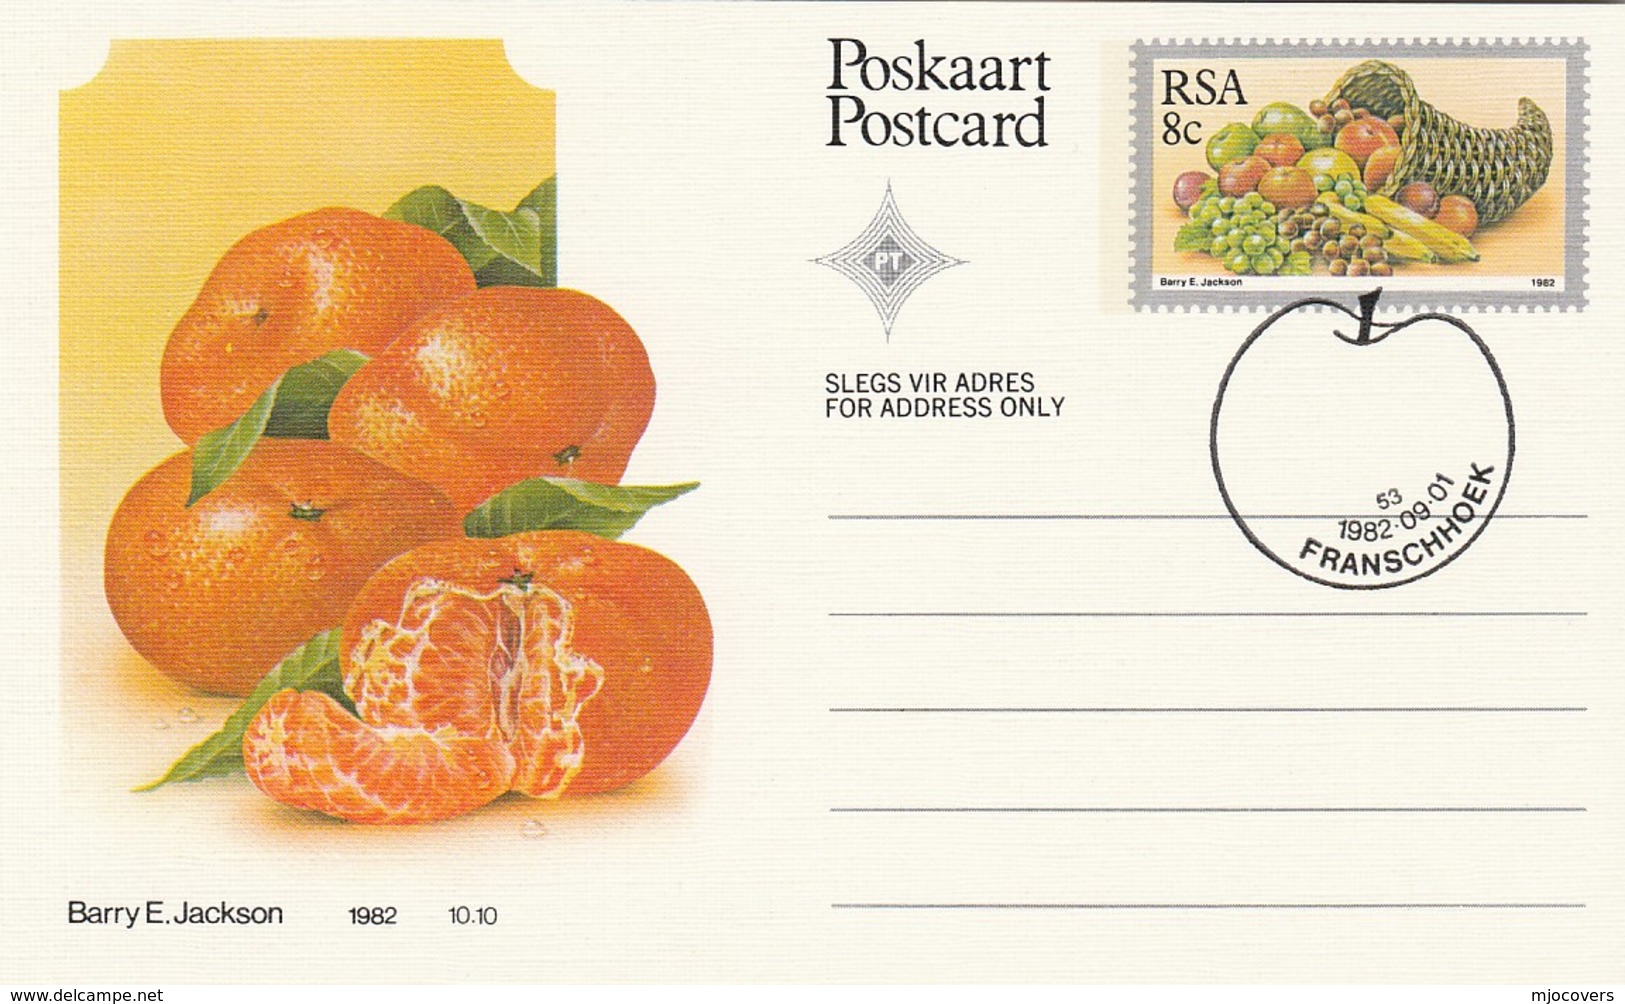 1982 First Day 8c SOUTH AFRICA Postal STATIONERY CARD Illus MANDARIN Orange FRUIT Cover Stamps Rsa Grapes Banana - Fruits